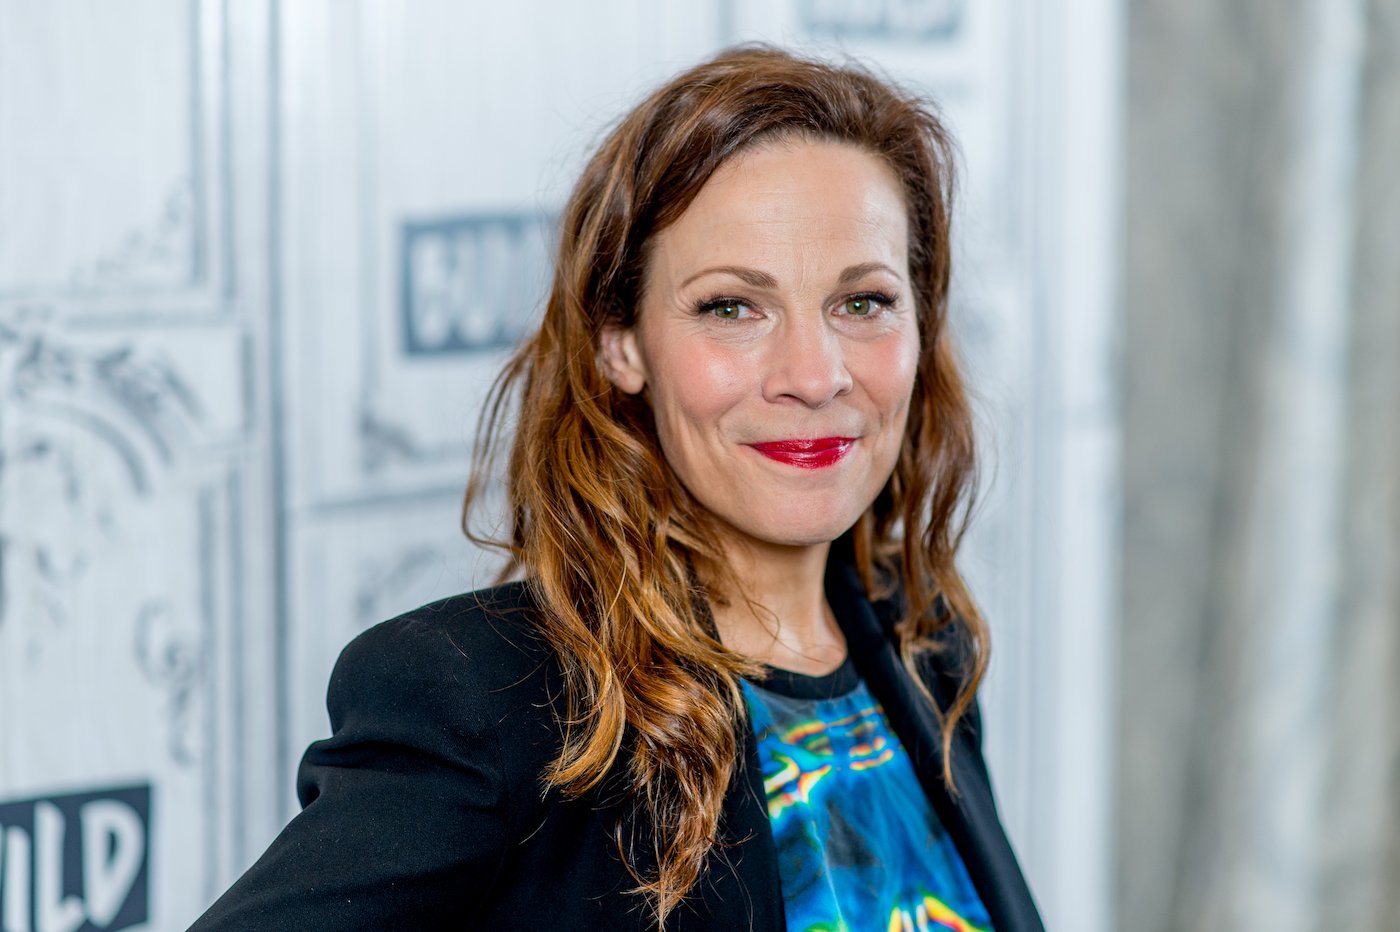 Actor Lili Taylor played Lisa Kimmel Fisher in the hit HBO series 'Six Feet Under'